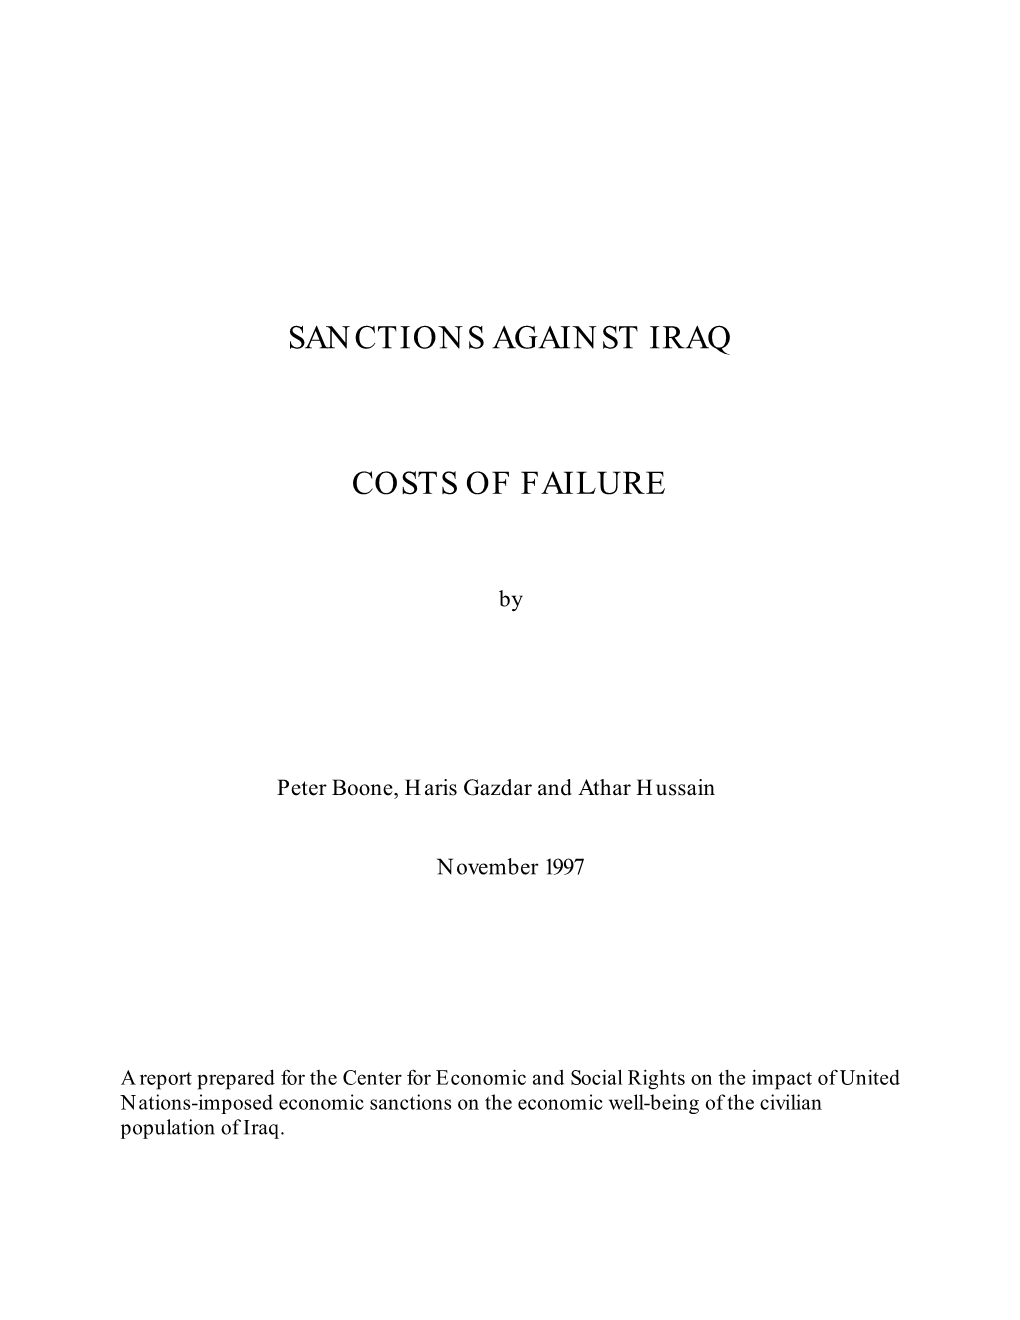 Sanctions Against Iraq Costs of Failure